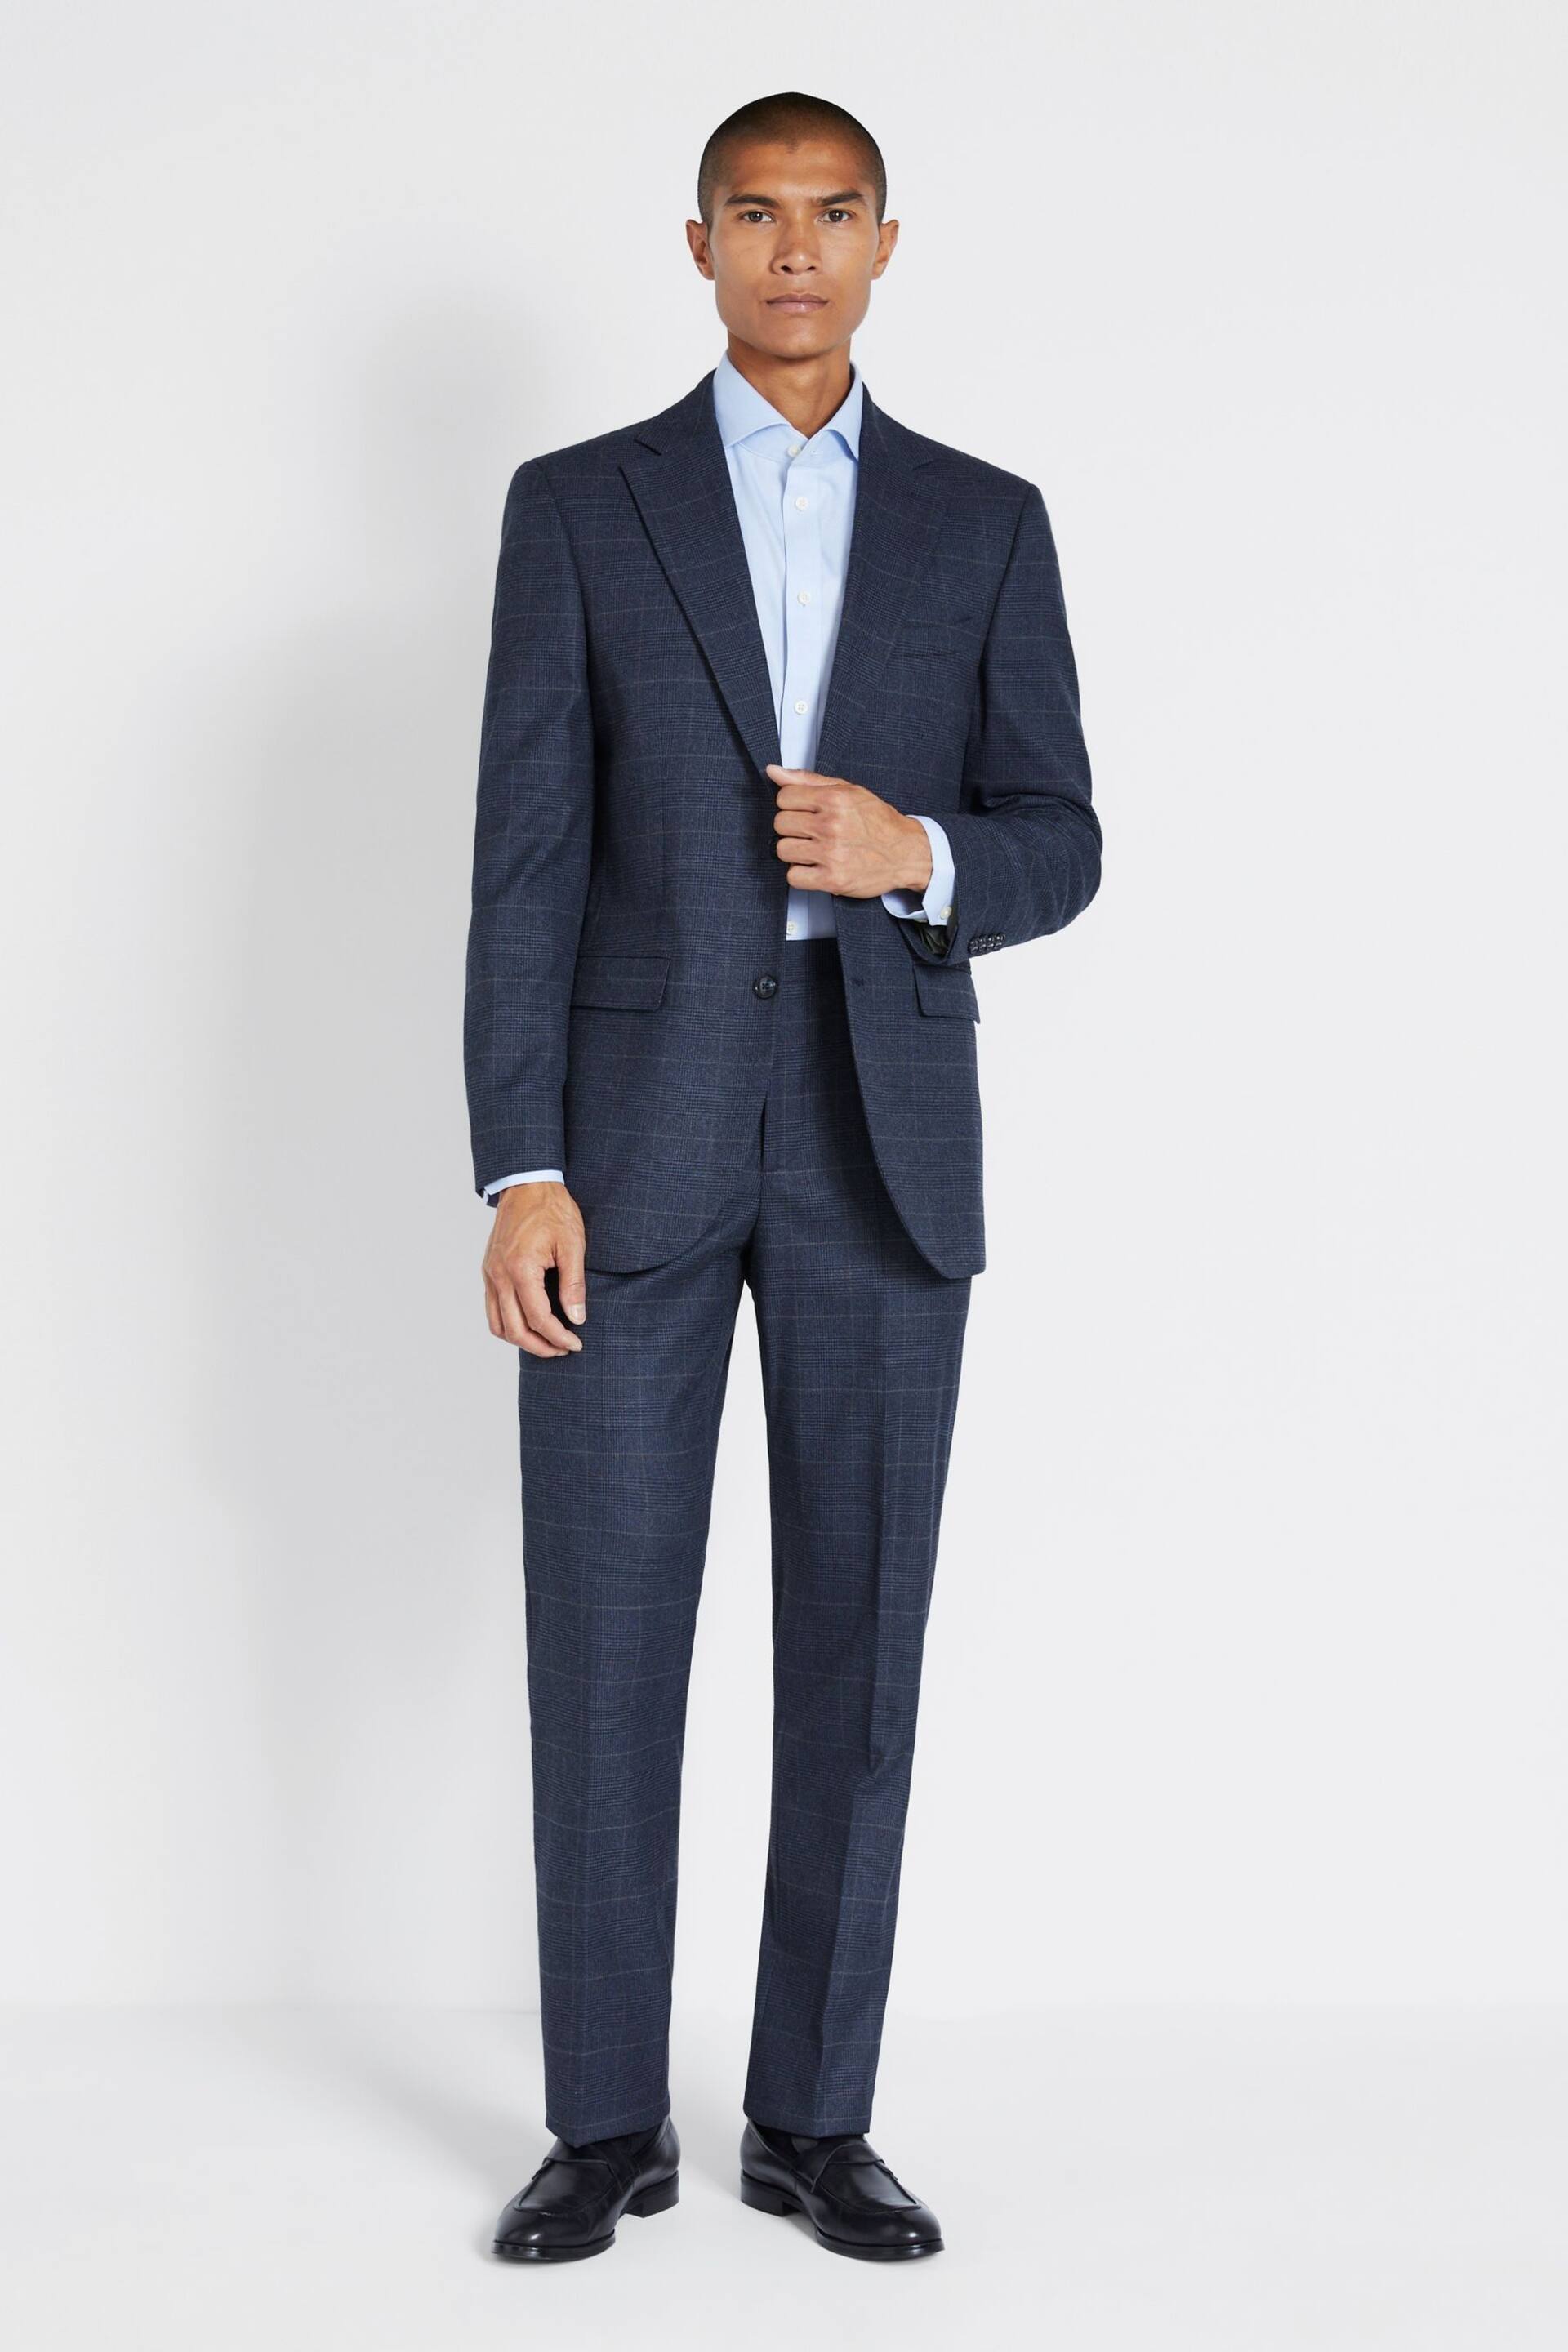 MOSS Regular Fit Blue With Khaki Check Suit: Jacket - Image 4 of 5